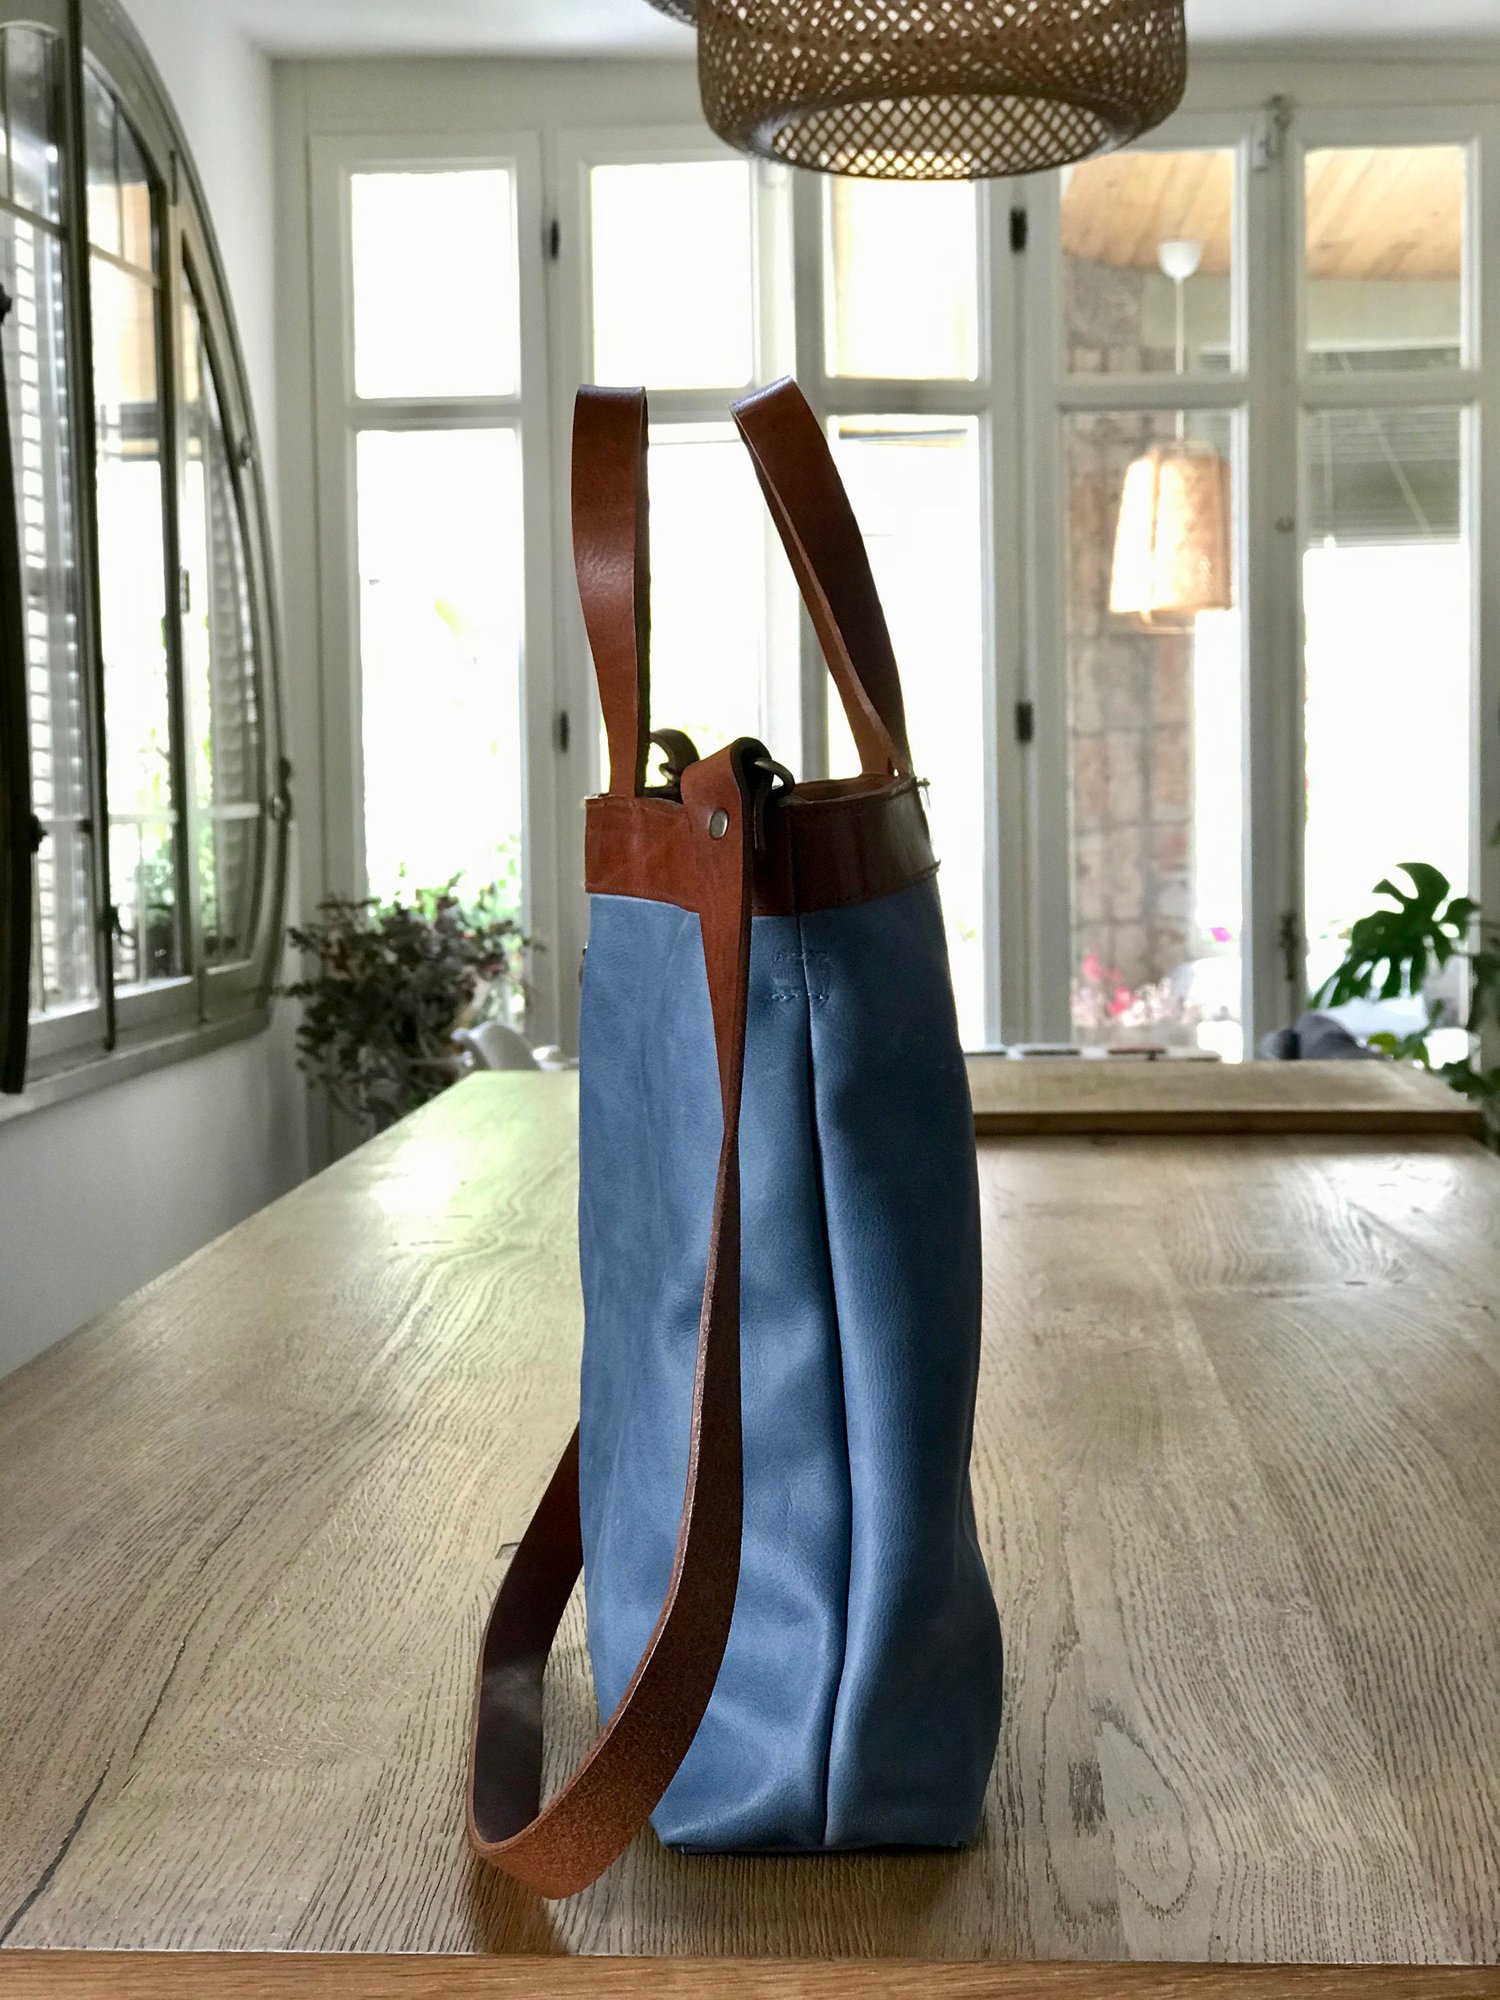 Leather tote bag with zipper and inside lining. Shoulder bag